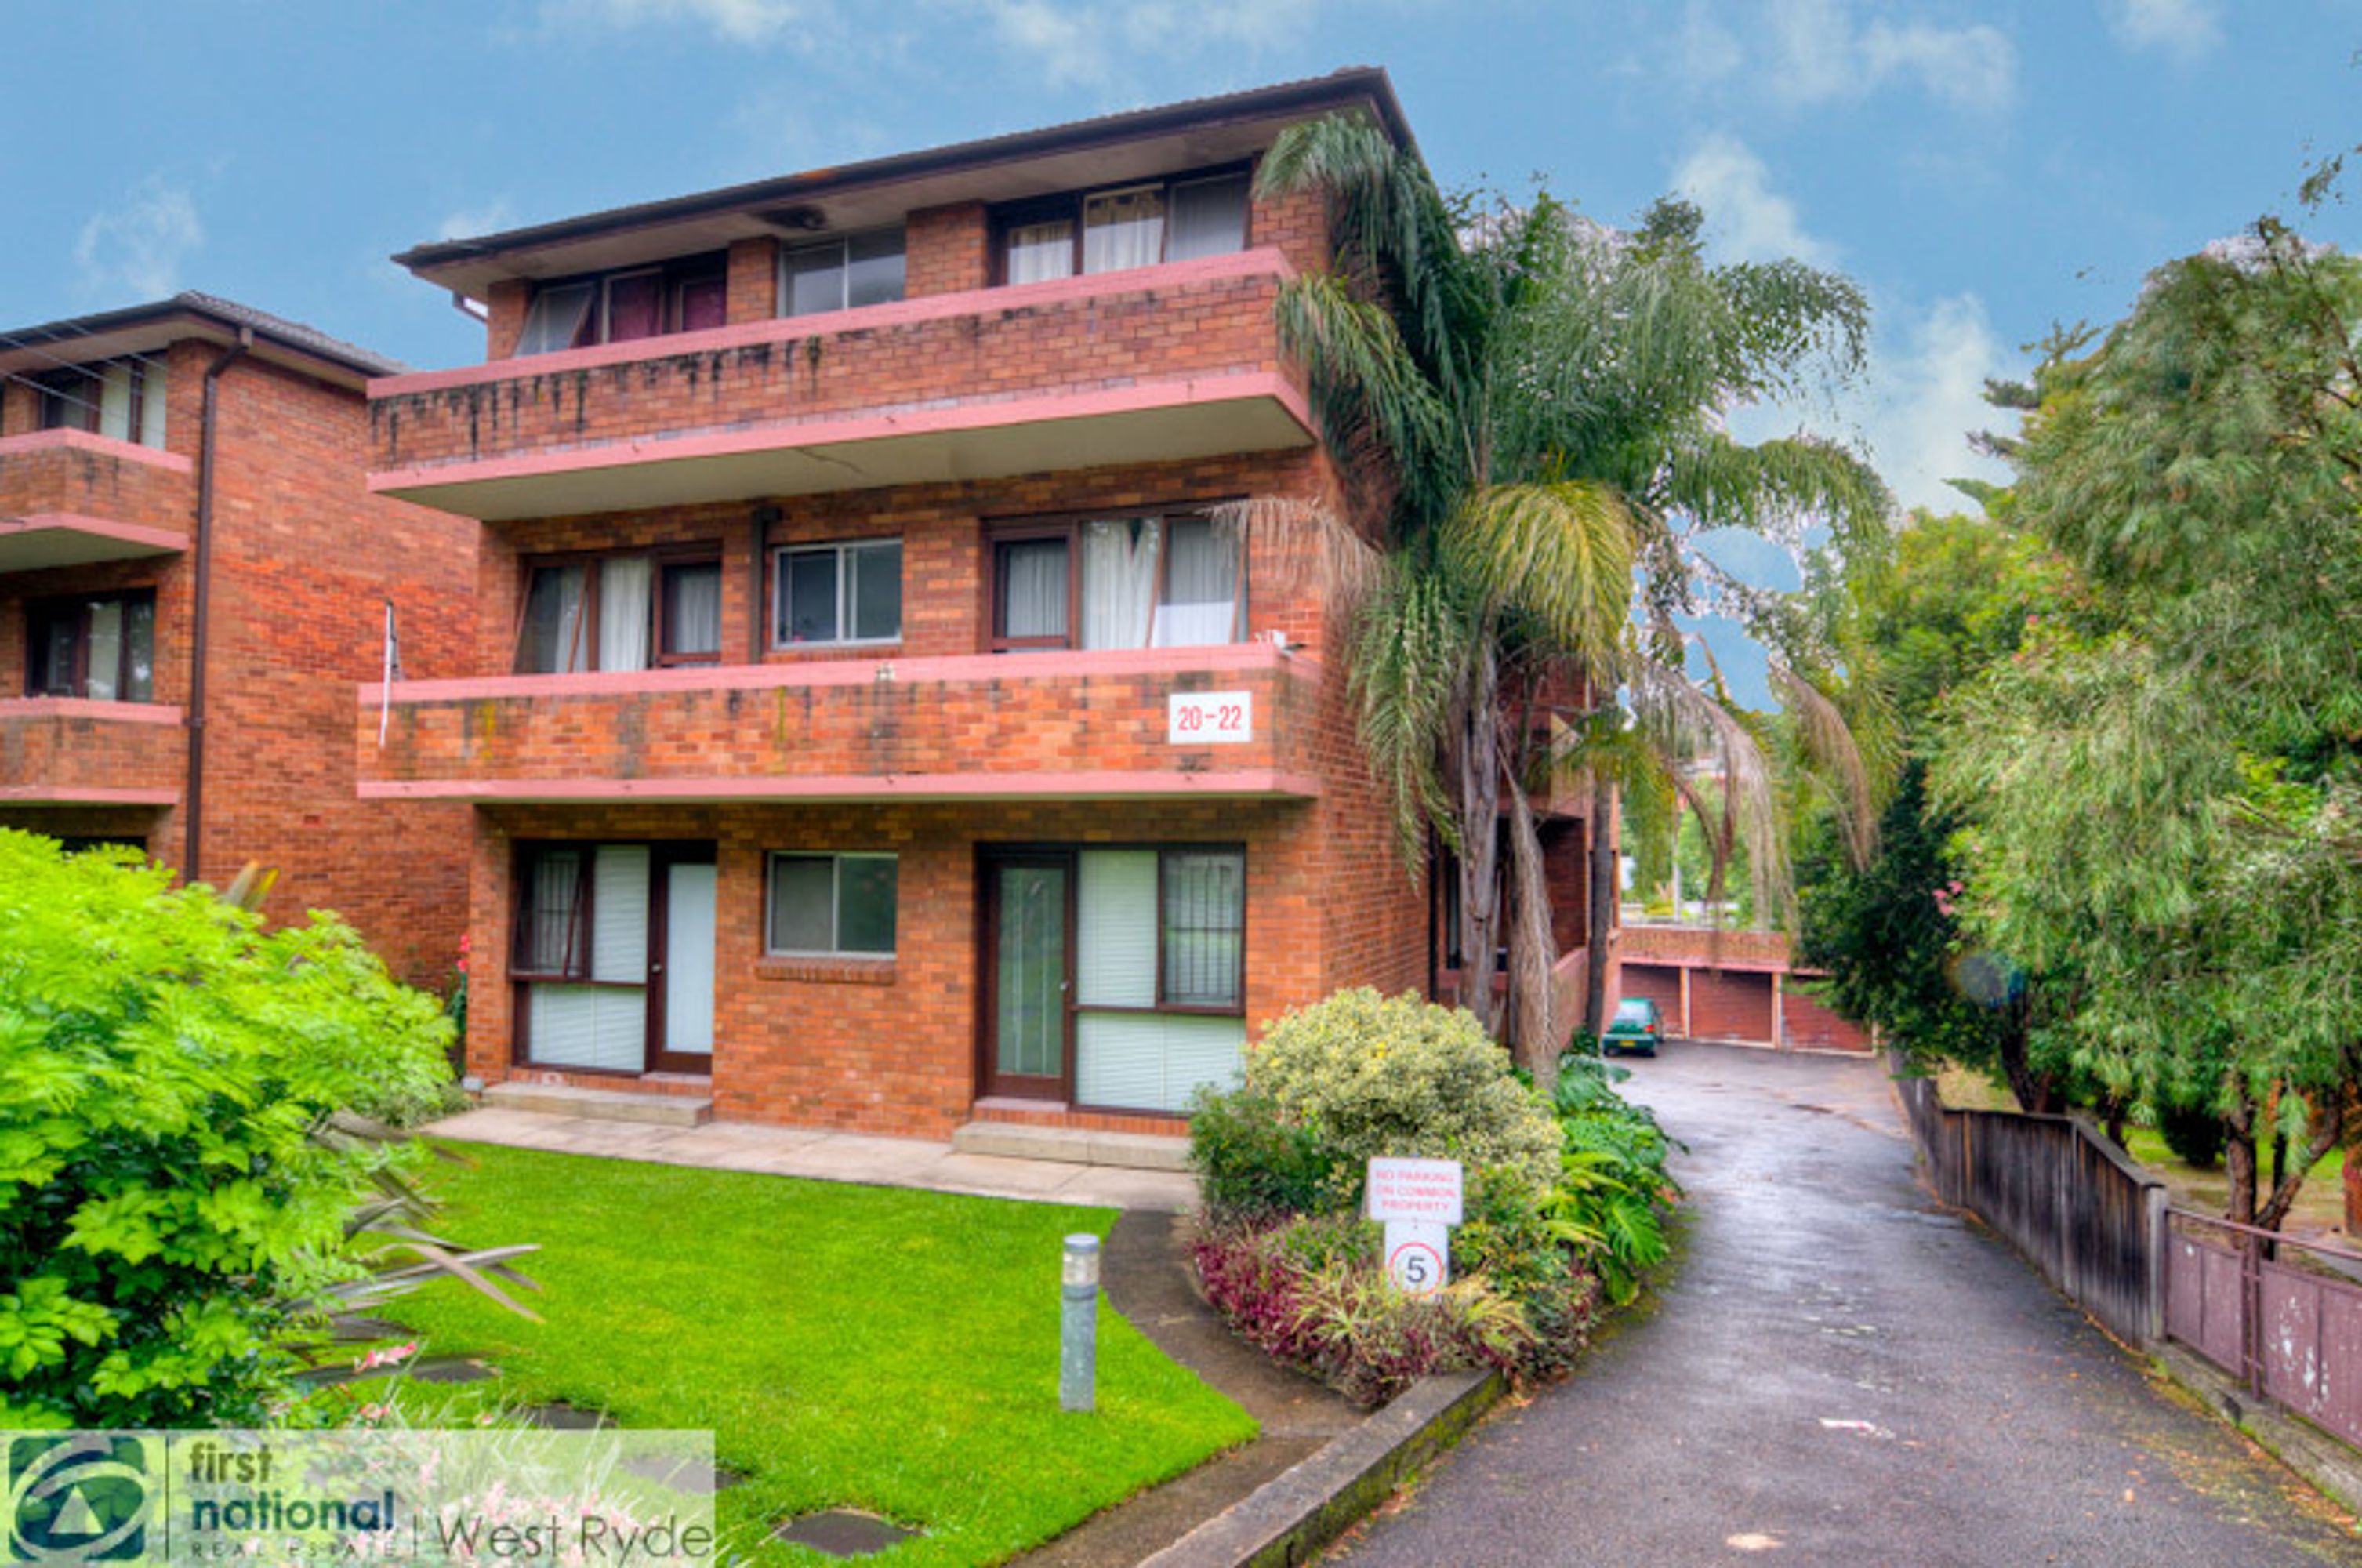 15/20-22 Station Street, West Ryde, NSW 2114